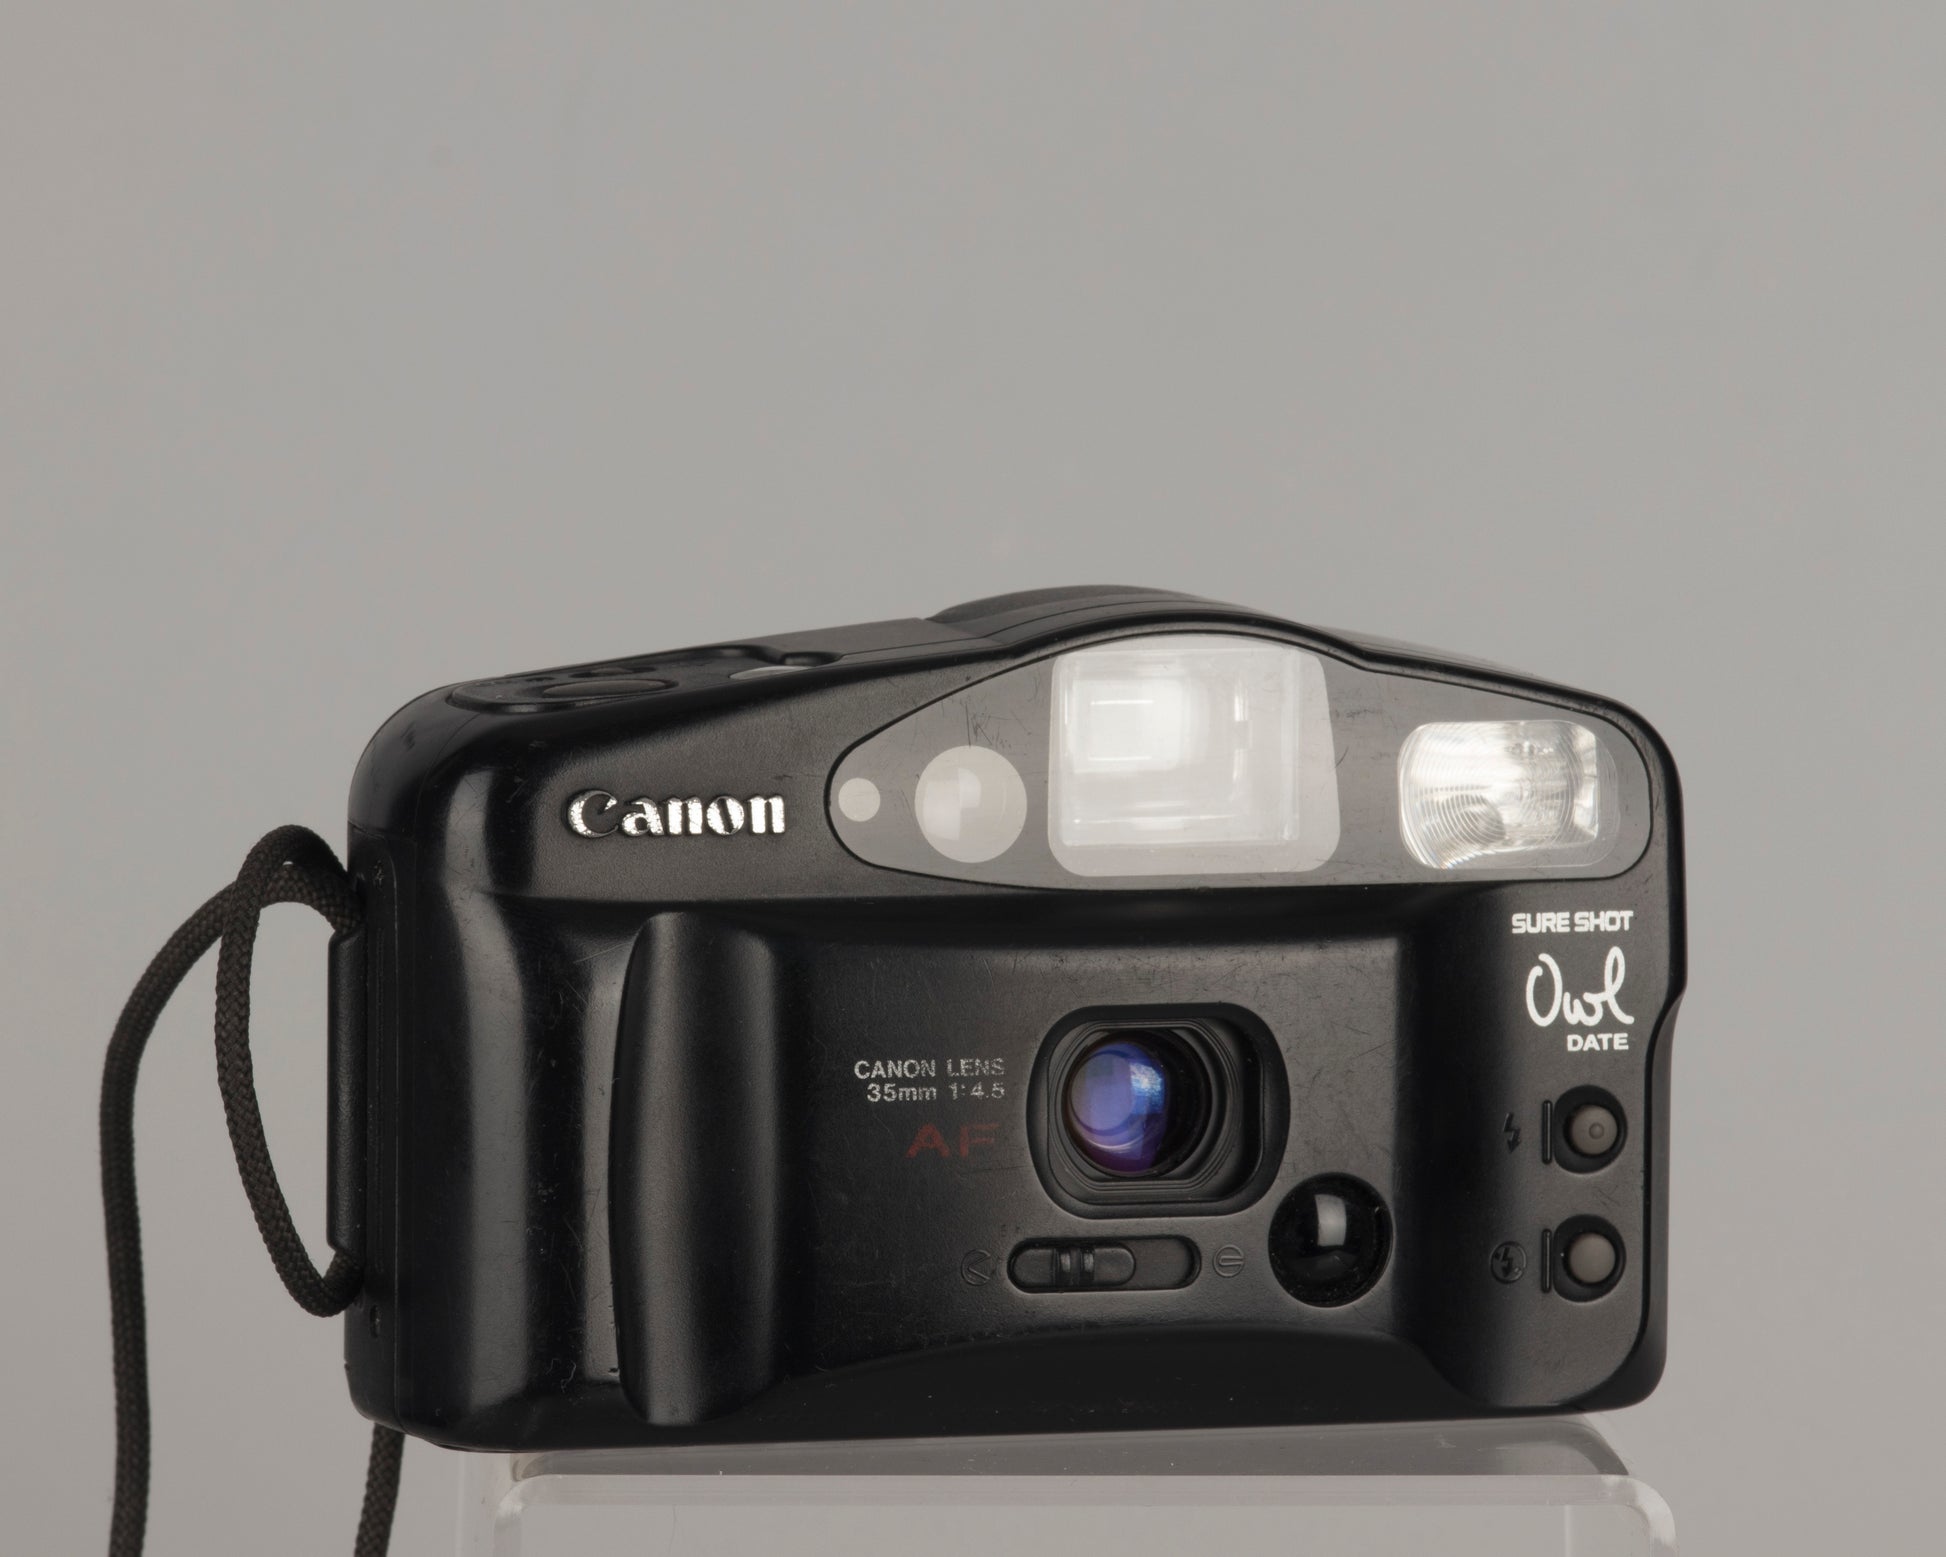 The Canon Sure Shot Owl Date is a 35mm point-and-shoot camera with a 35mm focal length lens